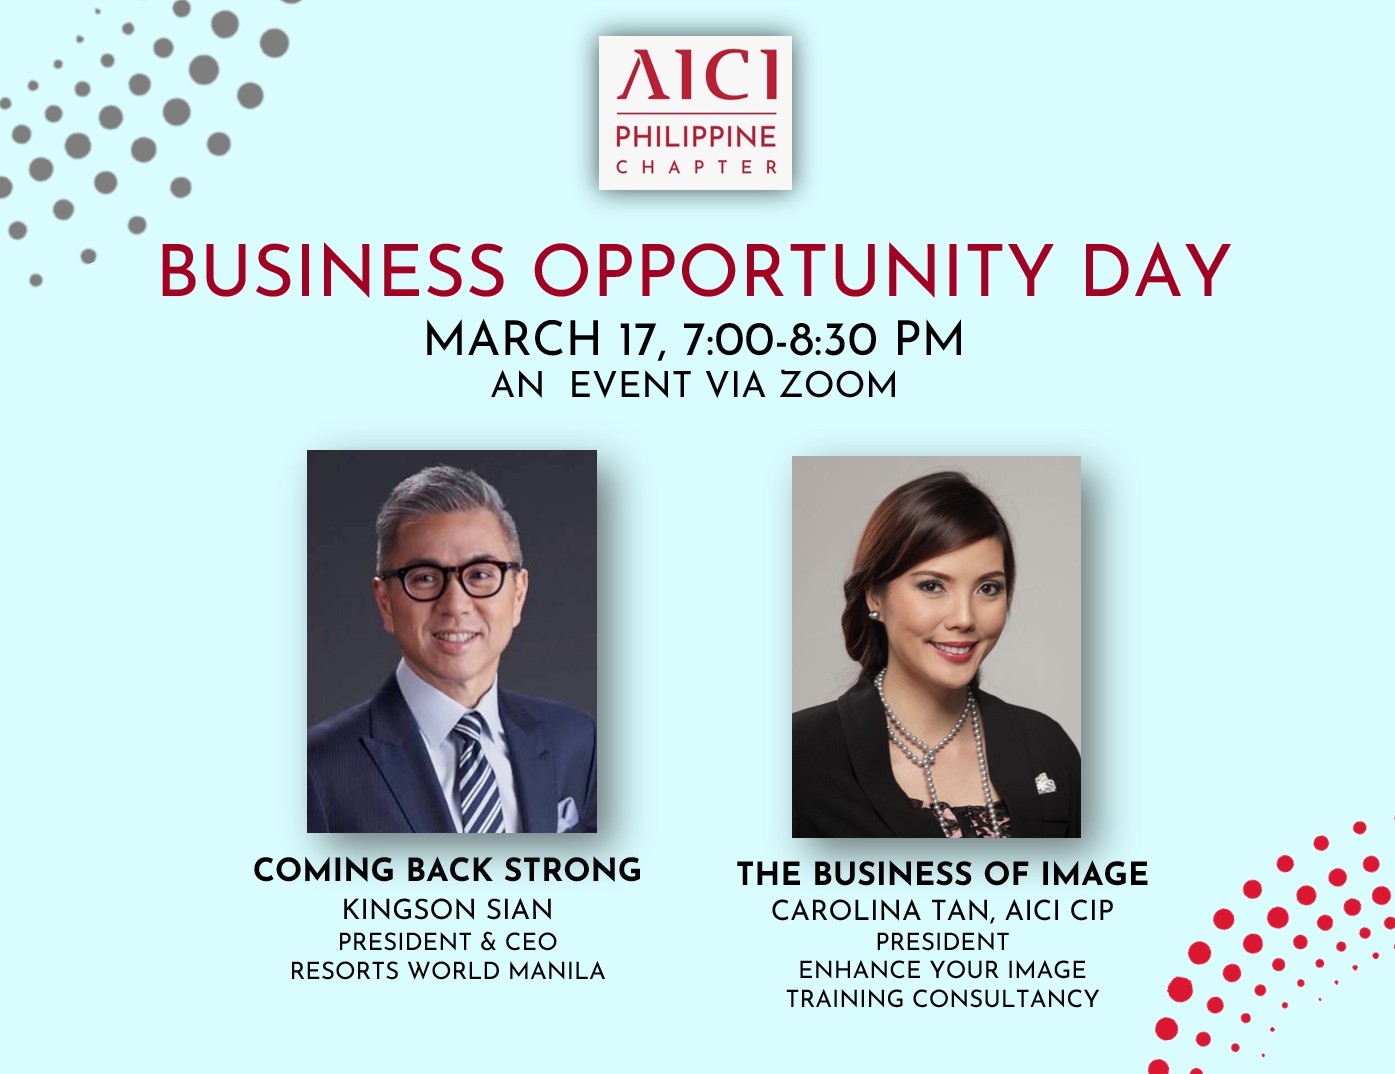 BUSINESS OPPORTUNITY DAY @ The AICI Philippine Chapter